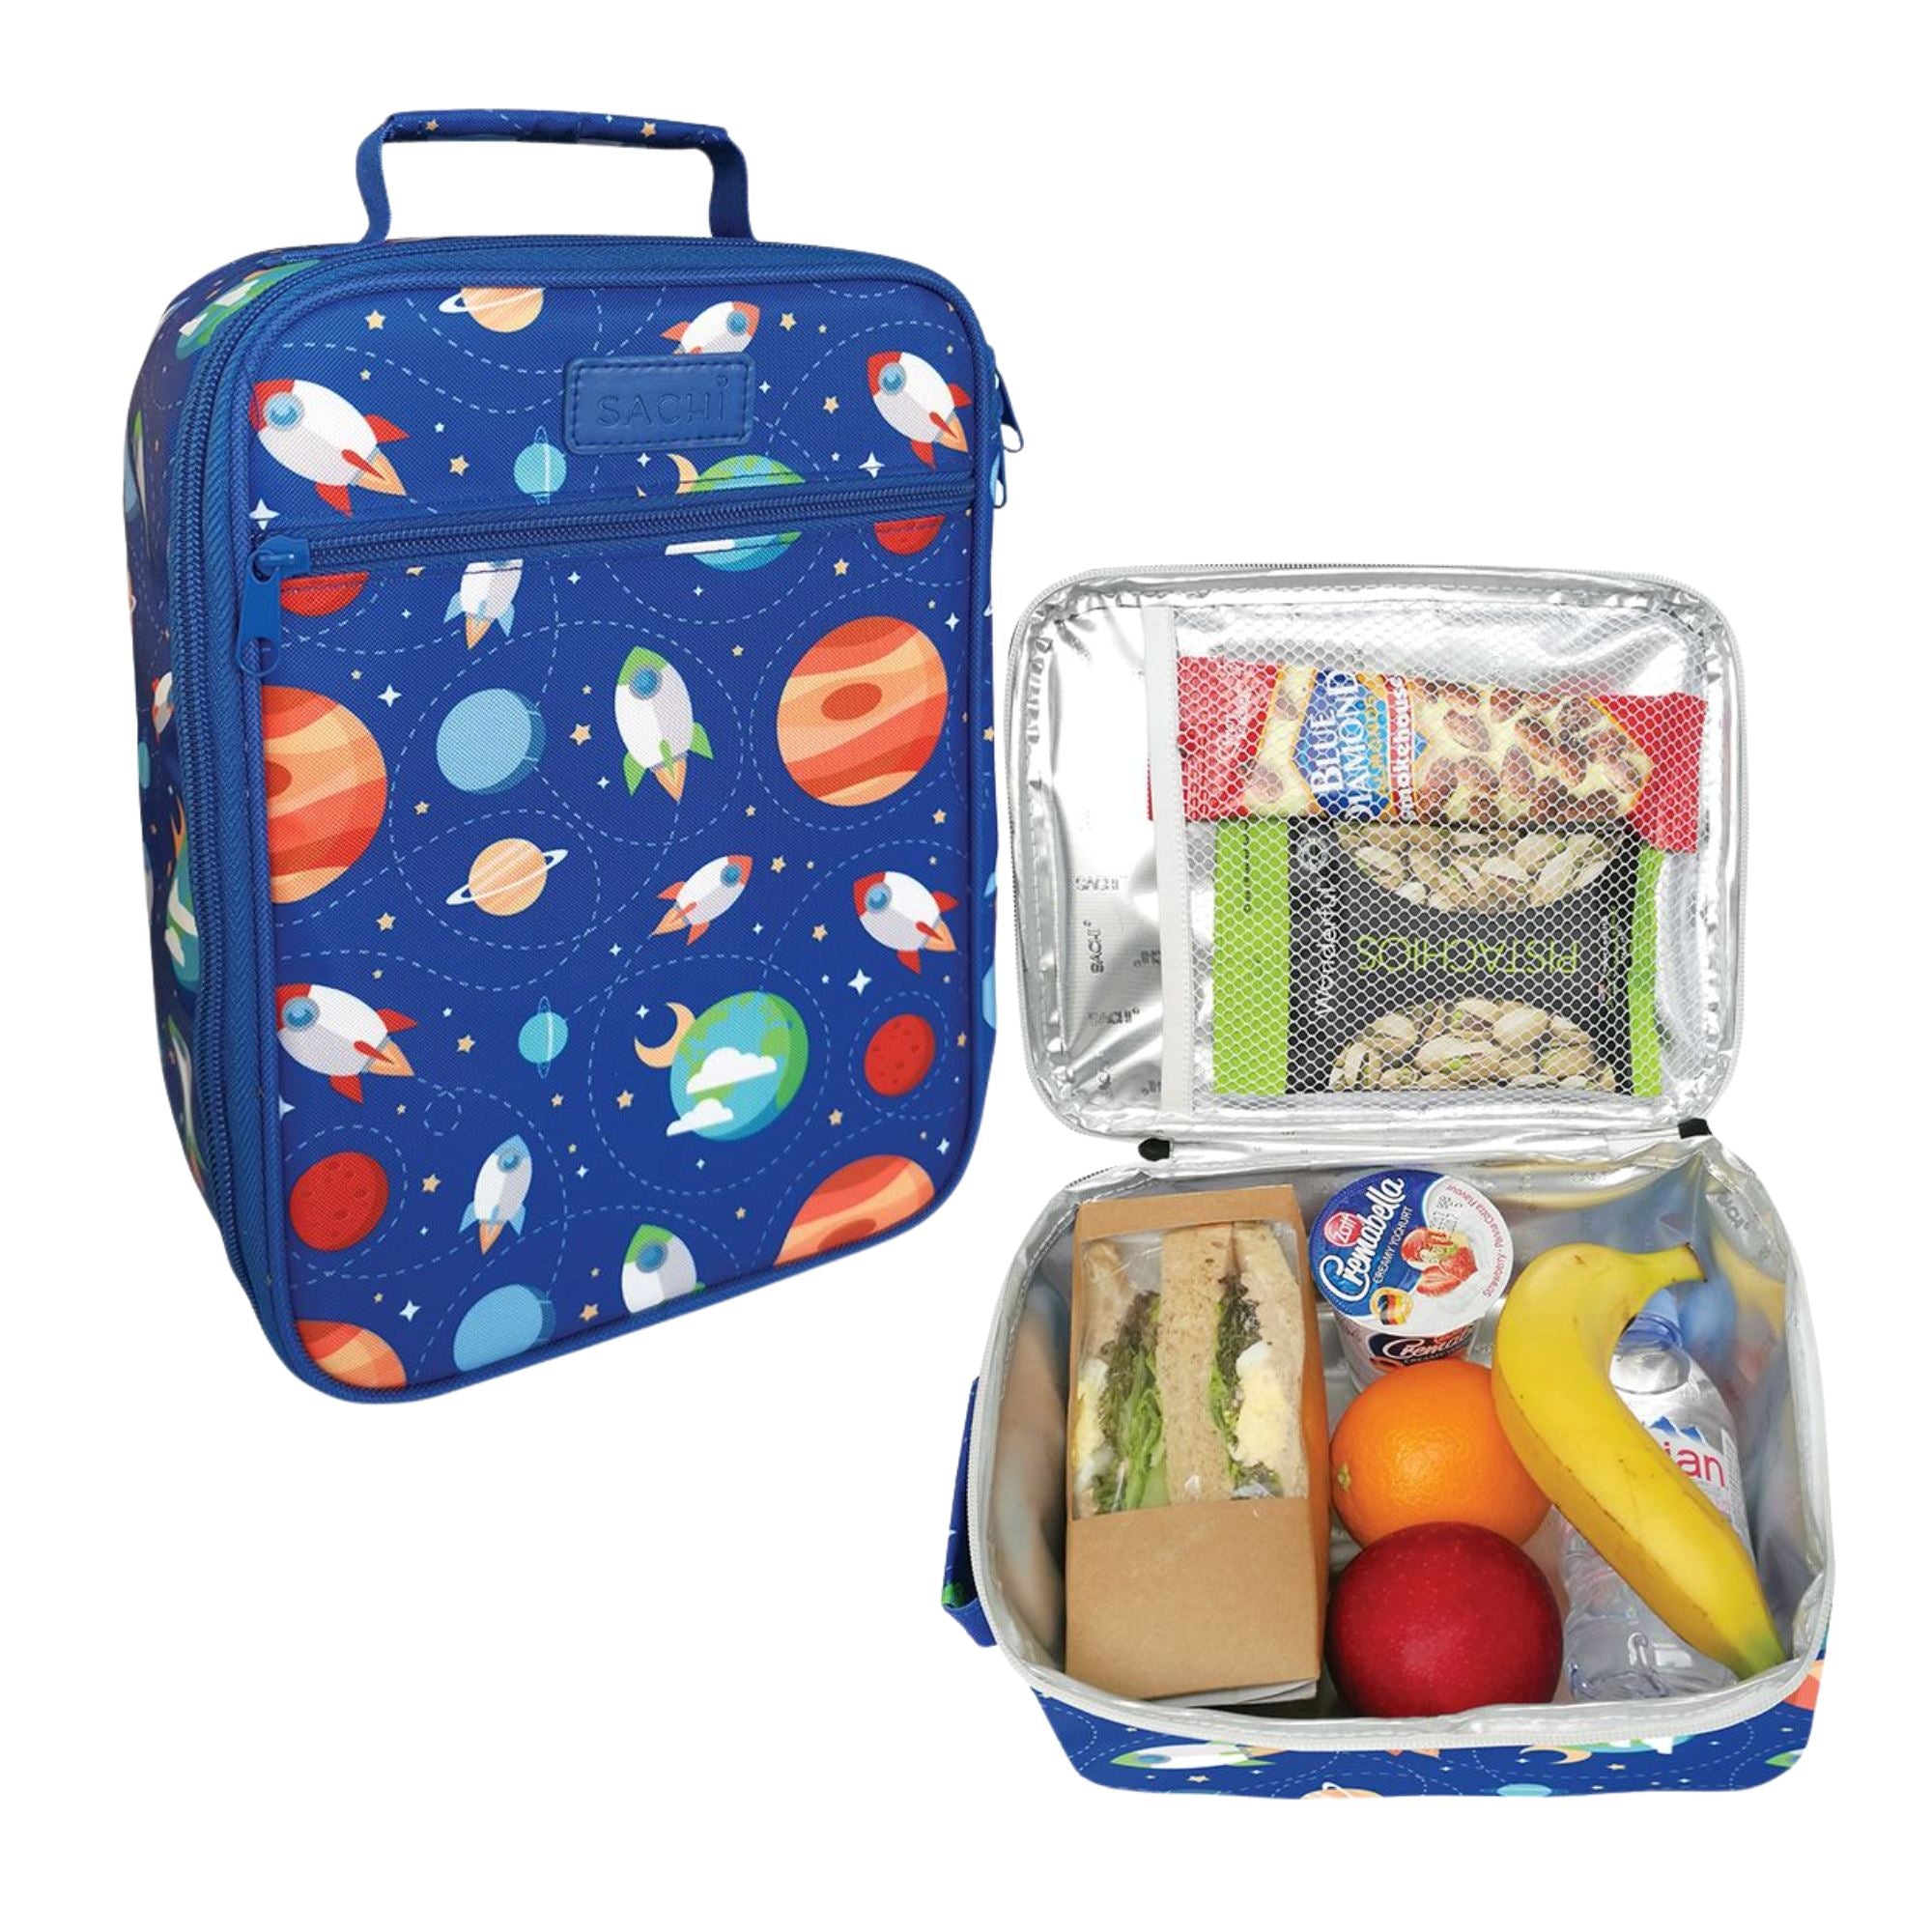 Sachi Insulated Outer Space Lunch Bag Lunch Boxes & Totes Sachi 